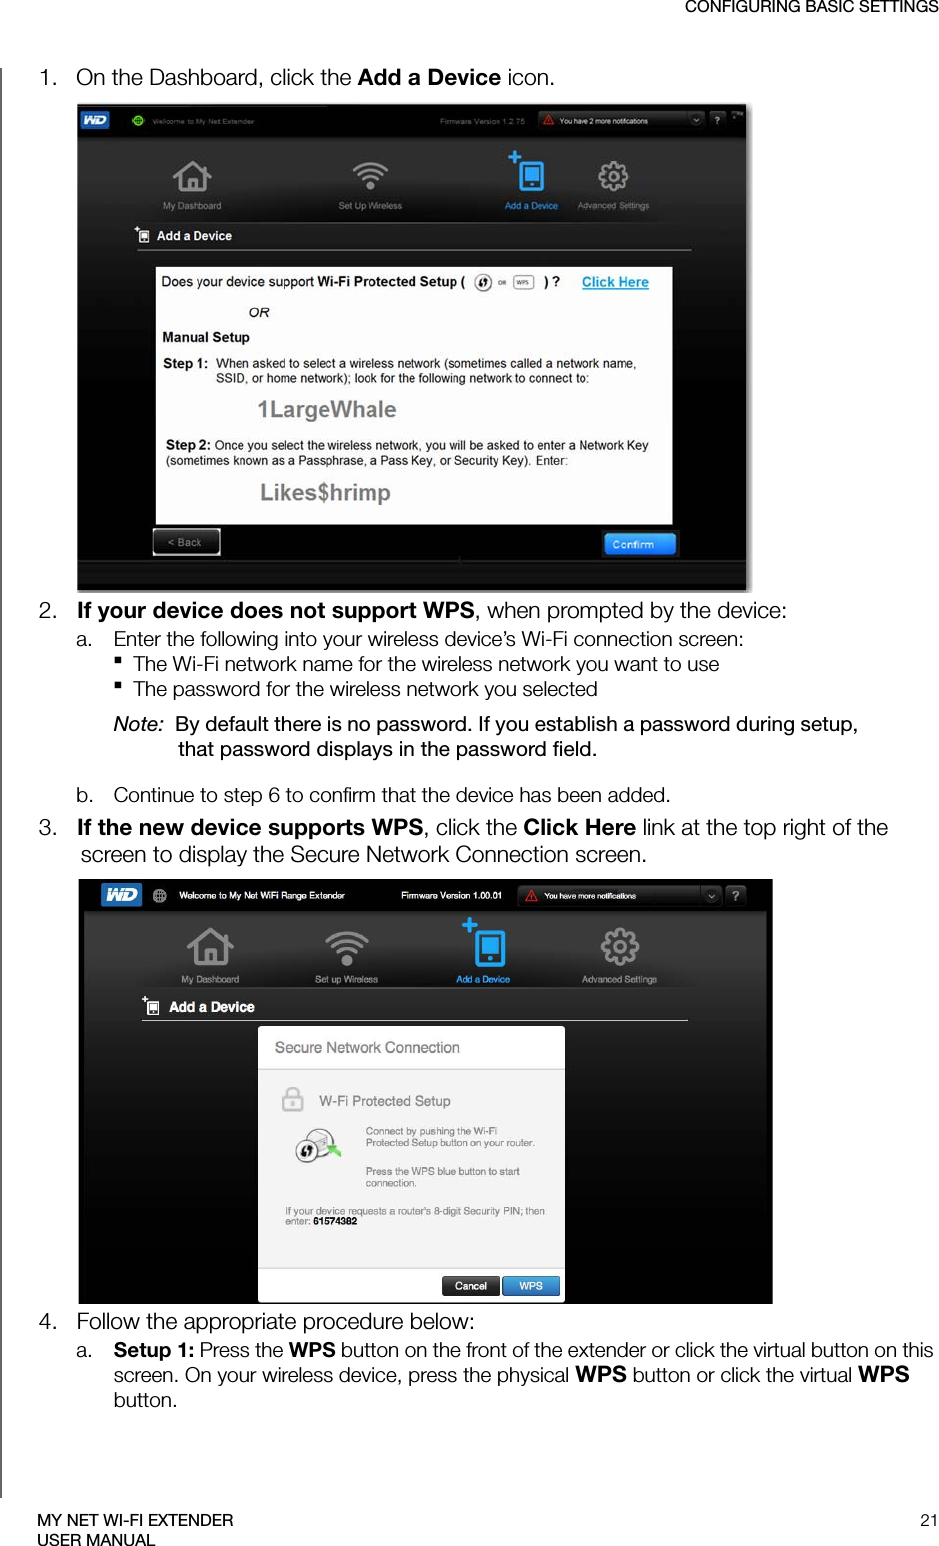 CONFIGURING BASIC SETTINGS21MY NET WI-FI EXTENDERUSER MANUAL1.   On the Dashboard, click the Add a Device icon.2.   If your device does not support WPS, when prompted by the device:a. Enter the following into your wireless device’s Wi-Fi connection screen: The Wi-Fi network name for the wireless network you want to use The password for the wireless network you selected Note:  By default there is no password. If you establish a password during setup, that password displays in the password field.b. Continue to step 6 to confirm that the device has been added.3.   If the new device supports WPS, click the Click Here link at the top right of the screen to display the Secure Network Connection screen. 4.   Follow the appropriate procedure below:a. Setup 1: Press the WPS button on the front of the extender or click the virtual button on this screen. On your wireless device, press the physical WPS button or click the virtual WPS button.